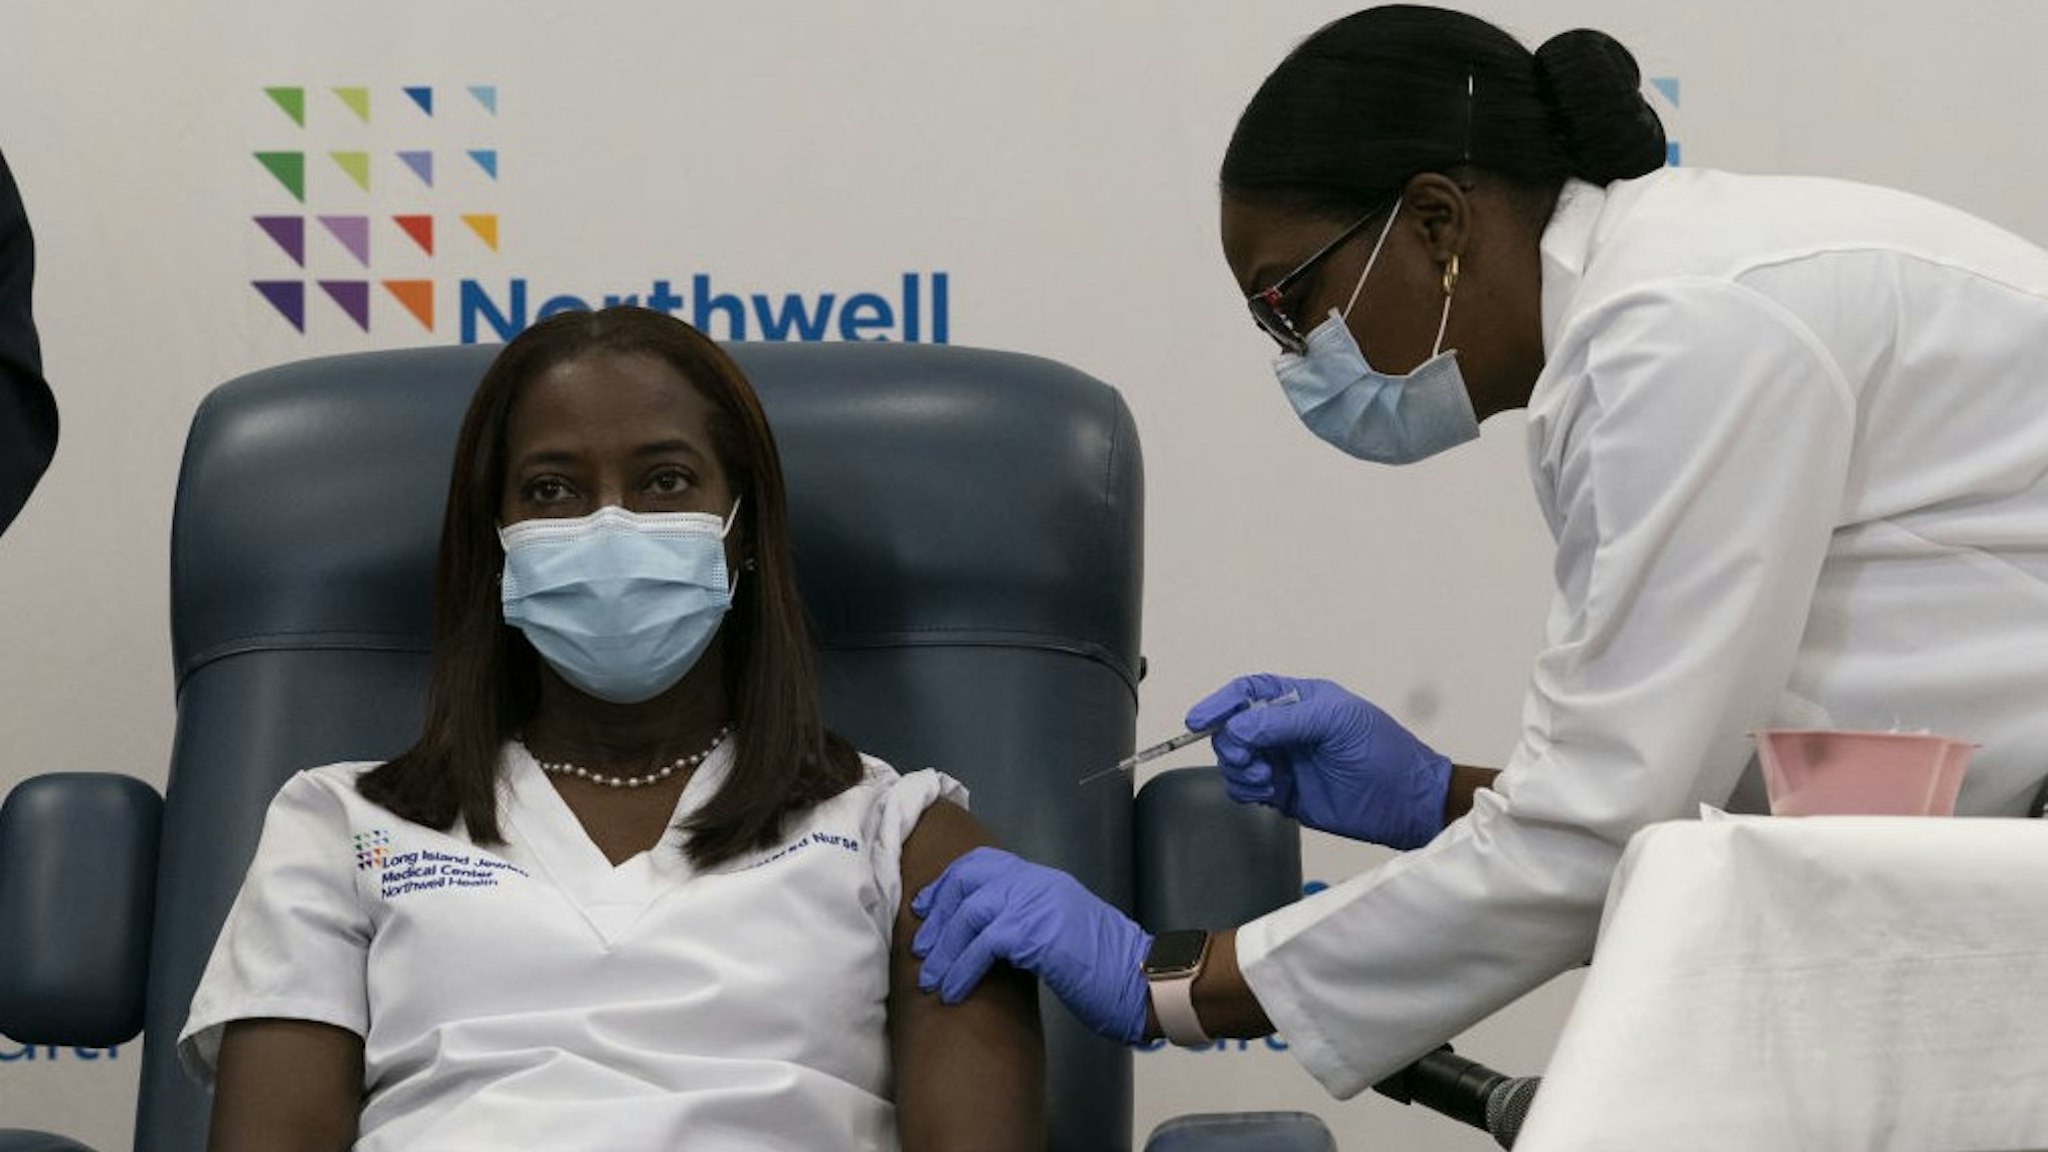 Healthcare worker Sandra Lindsay, left, receives the Pfizer-BioNTech Covid-19 vaccine from Dr. Michelle Chester at the Northwell Health Long Island Jewish Medical Center in the Queens borough of New York, U.S., on Monday, Dec. 14, 2020. The first Covid-19 vaccine shots were administered by U.S. hospitals Monday, the initial step in a historic drive to immunize millions of people as deaths approach the 300,000 mark. Photographer: